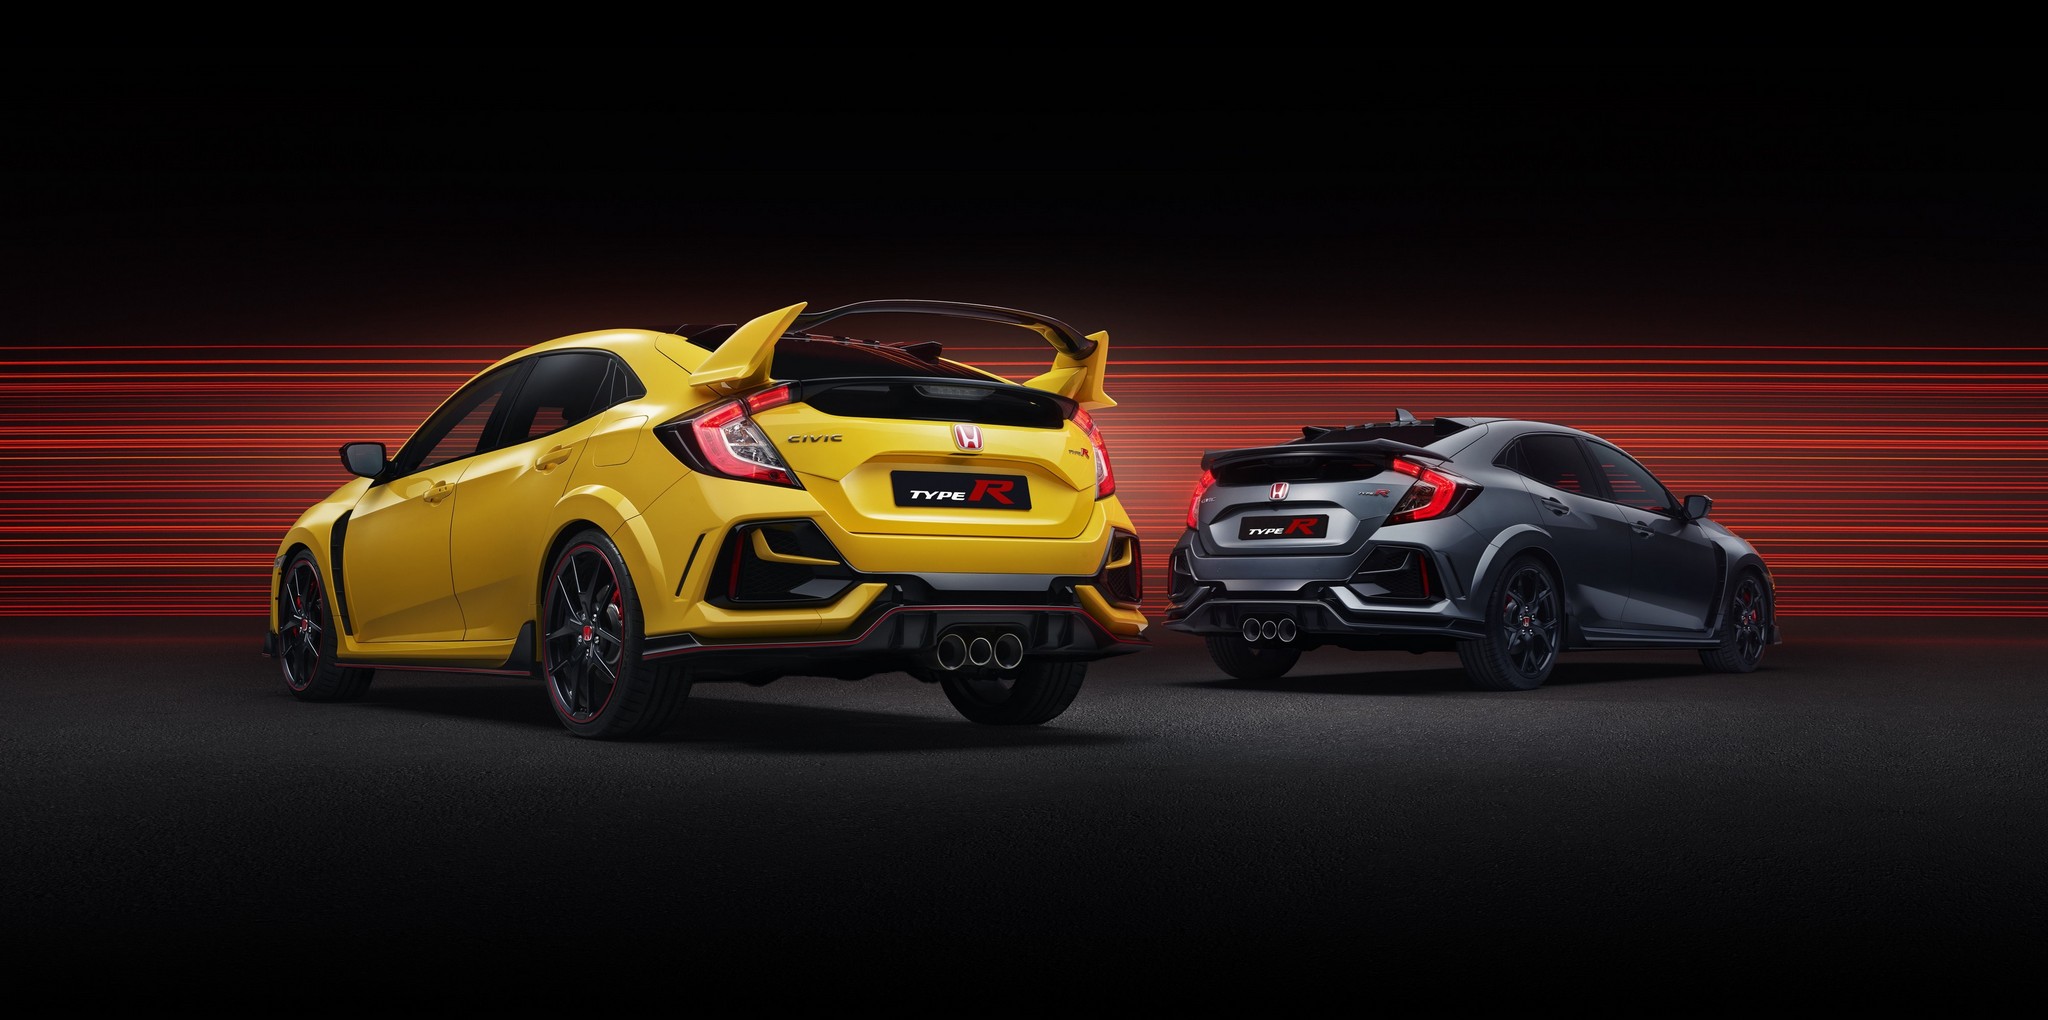 2020 Civic Type R Range - Type R Limited Edition & Type R Sport Line